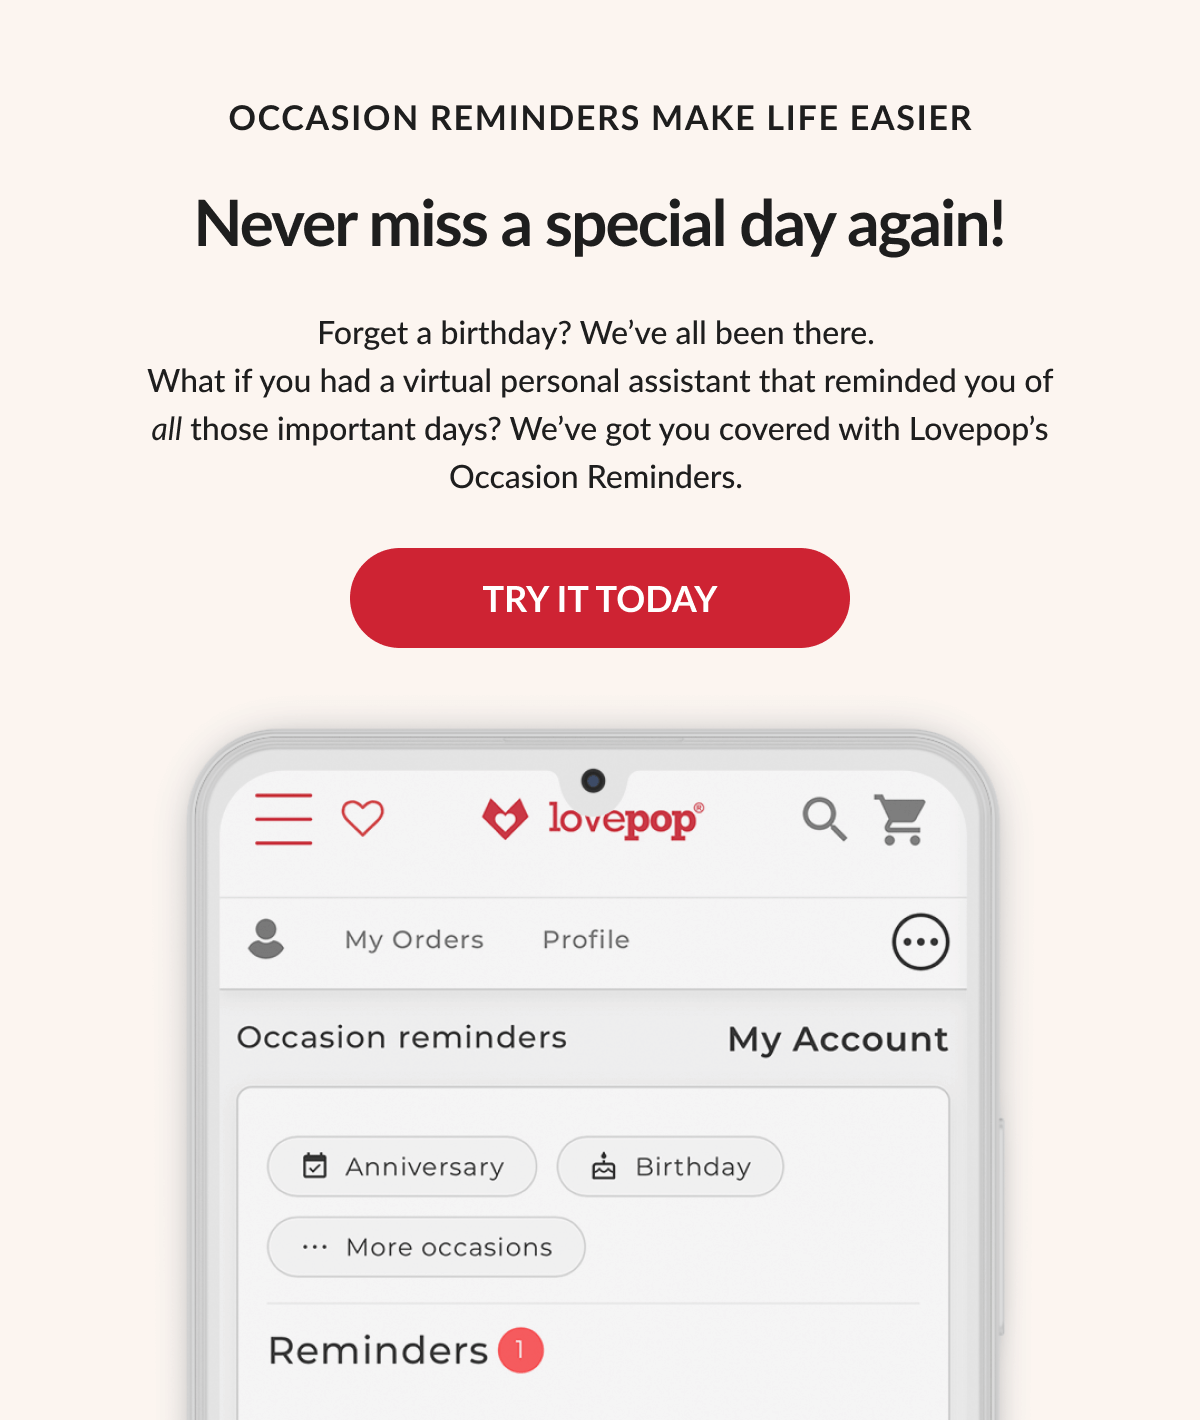 OCCASION REMINDERS MAKE LIFE EASIER | Never miss a special day again! Forget a birthday? We've all been there. What if you had a virtual personal assistant that reminded you of all those important days? We've got you covered with Lovepop's Occasion Reminders. | TRY IT TODAY